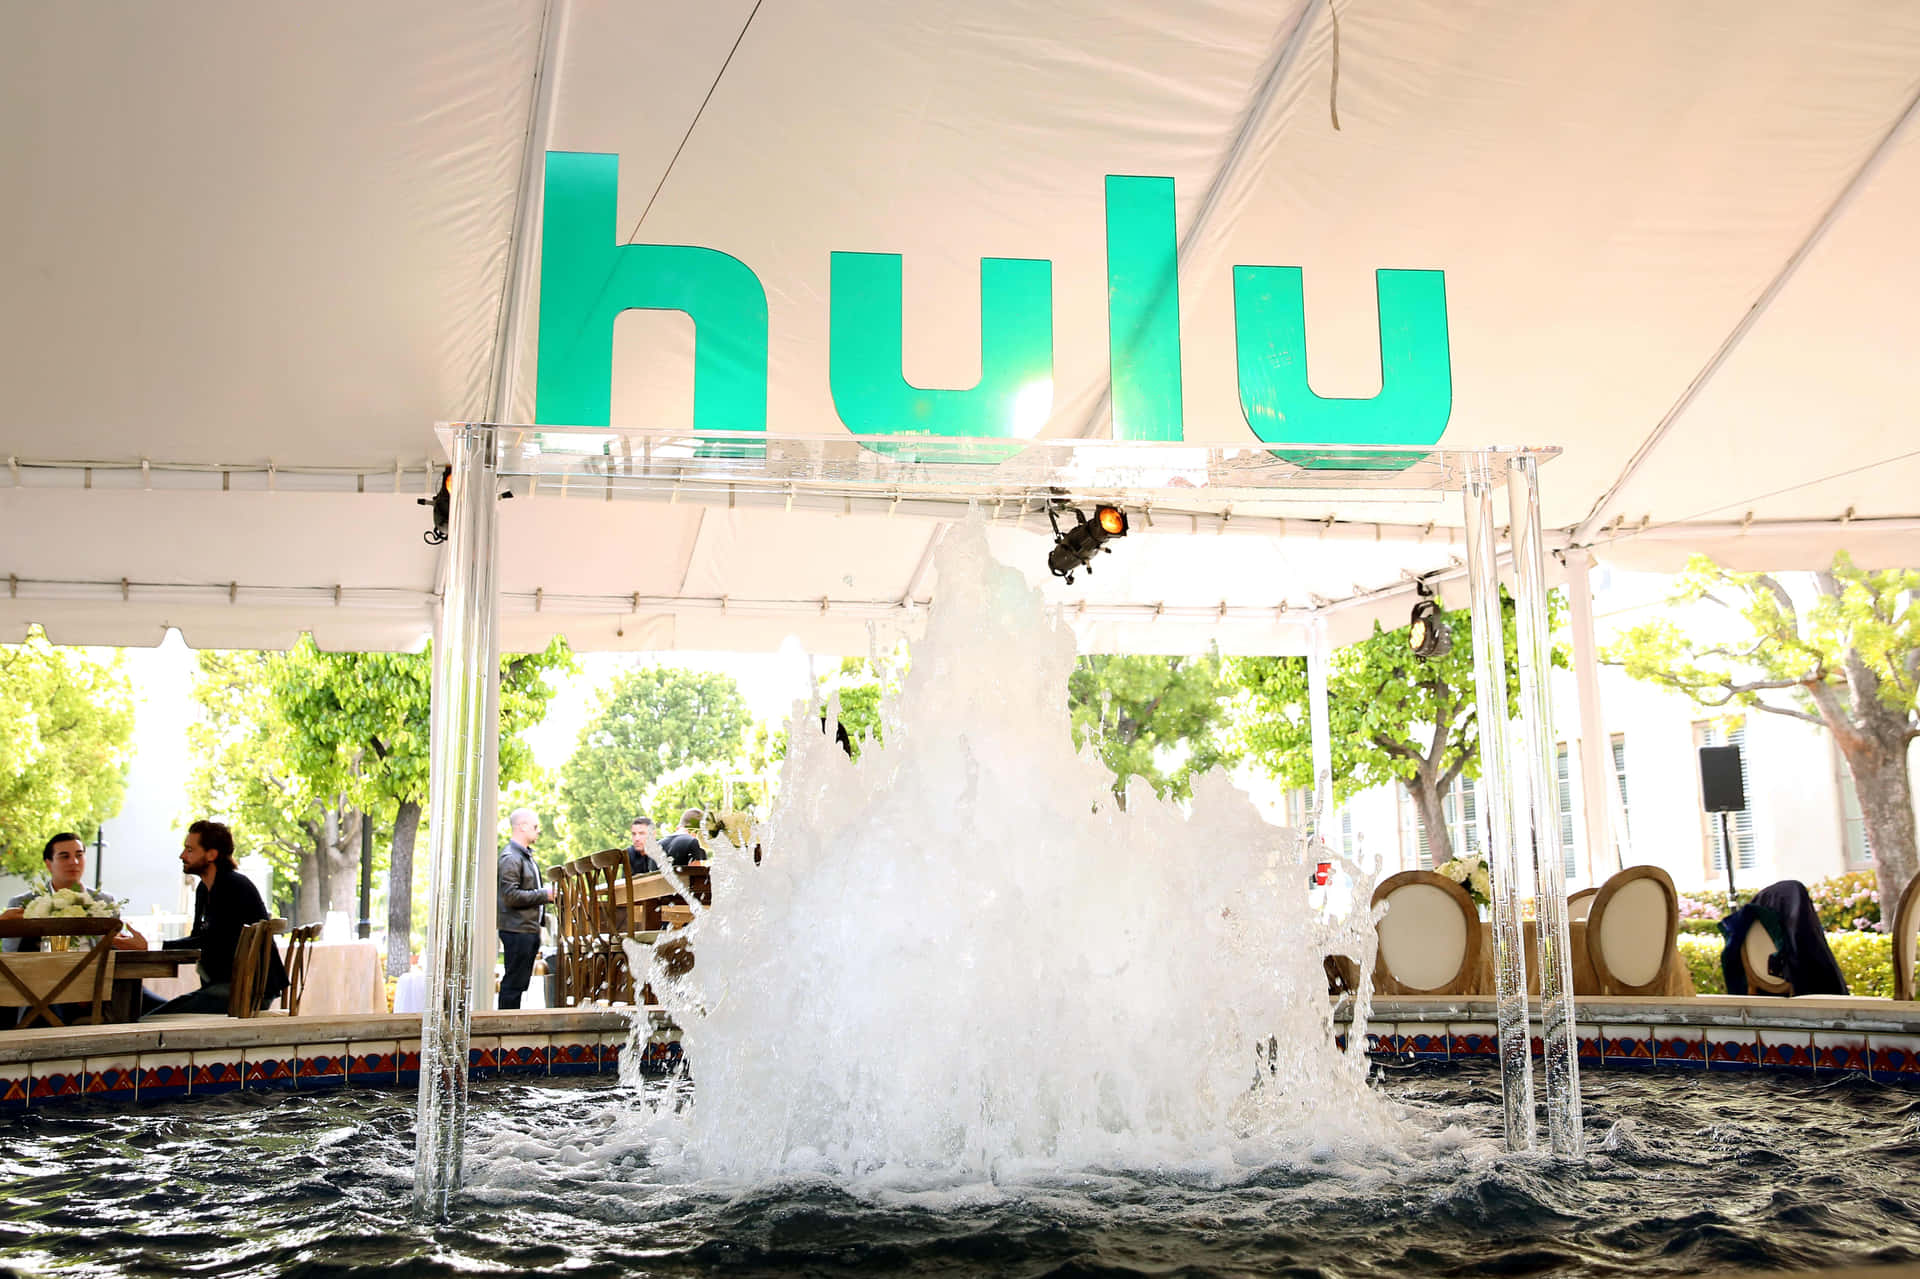 Stream your favourite shows on Hulu!